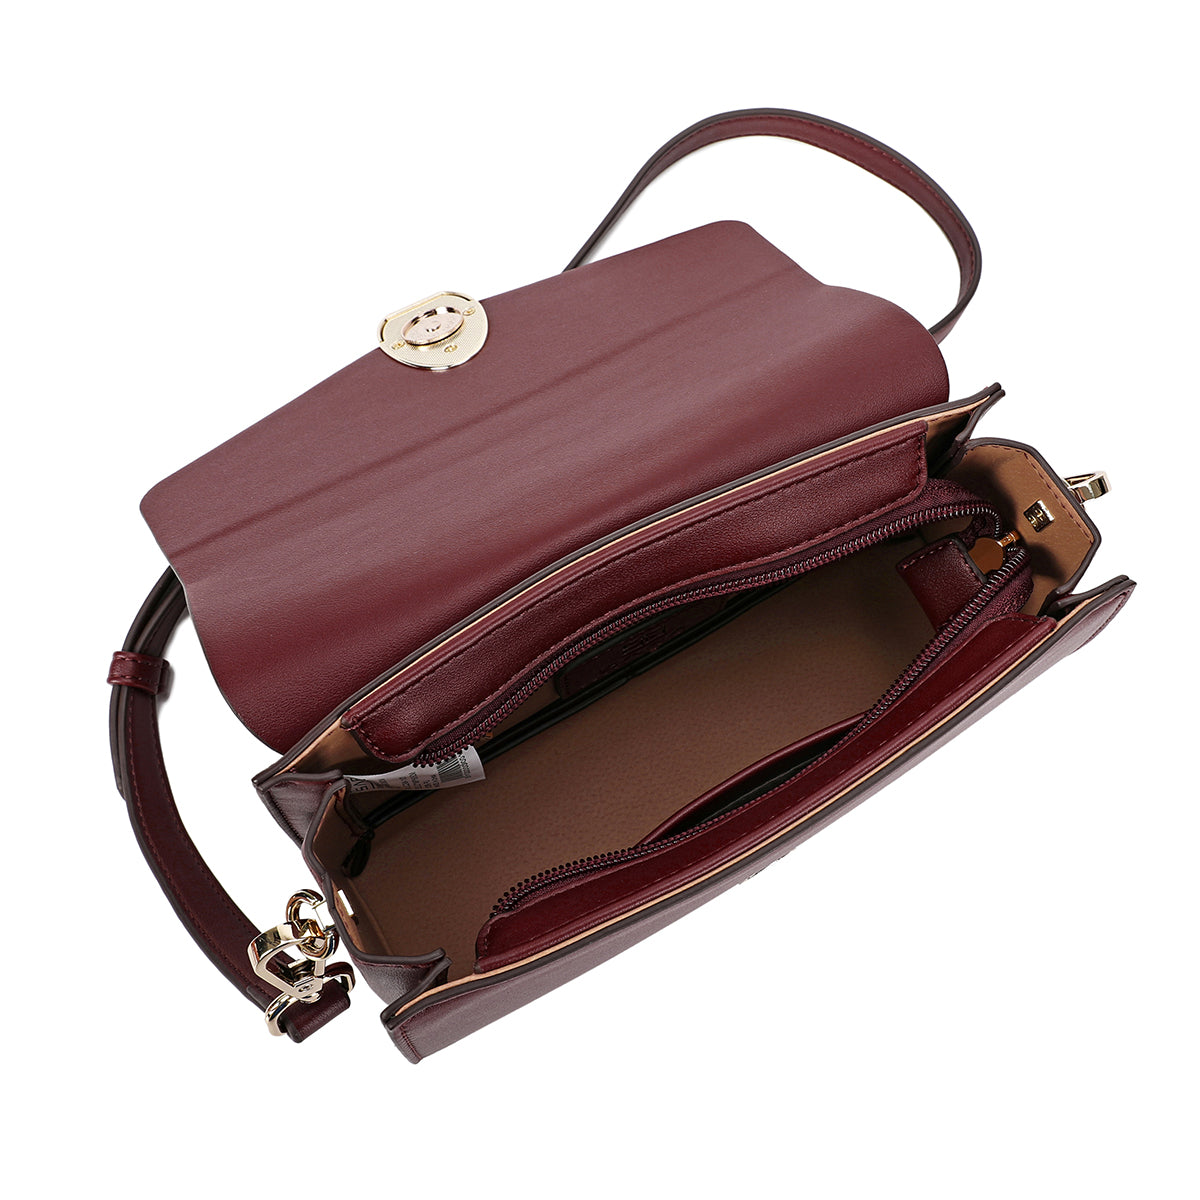 A light bag with an adjustable shoulder strap, width 21 cm, in maroon or blue colors